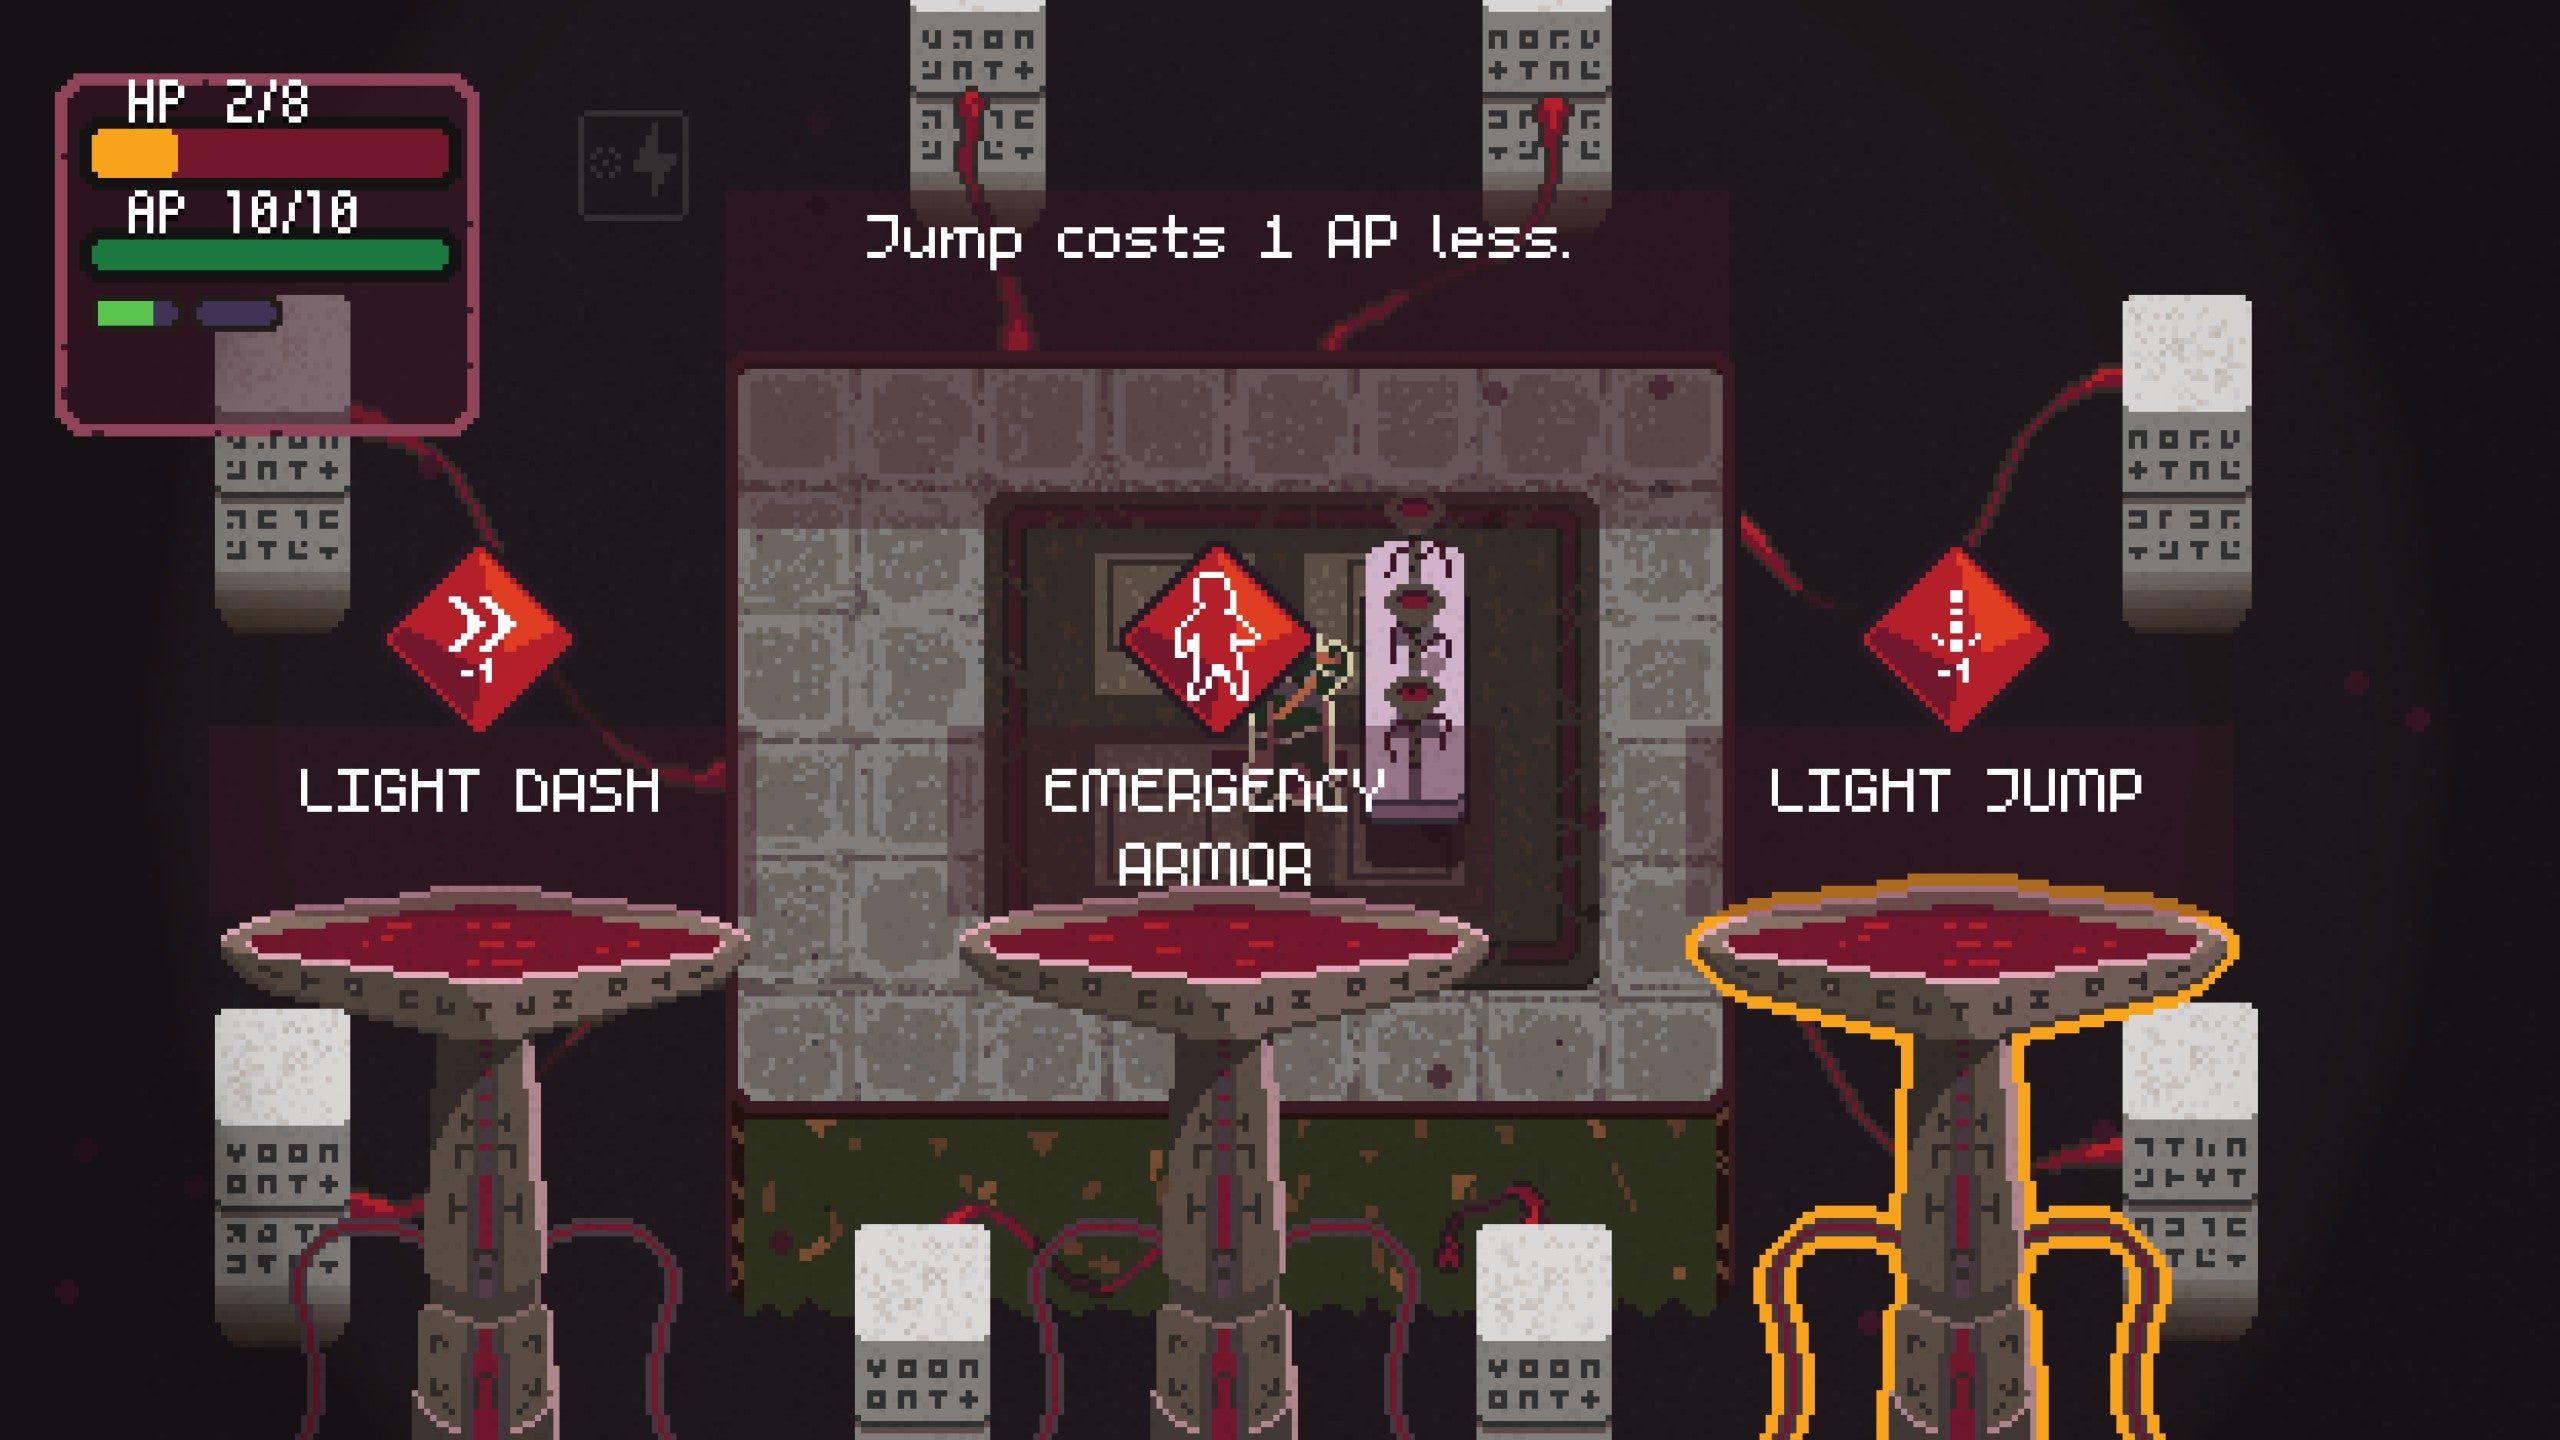 A selection chamber in the Undergrave, where you can improve abilities or heal.  Three pedestals of pooled blood represent the choices and show zoomed in on the screen.